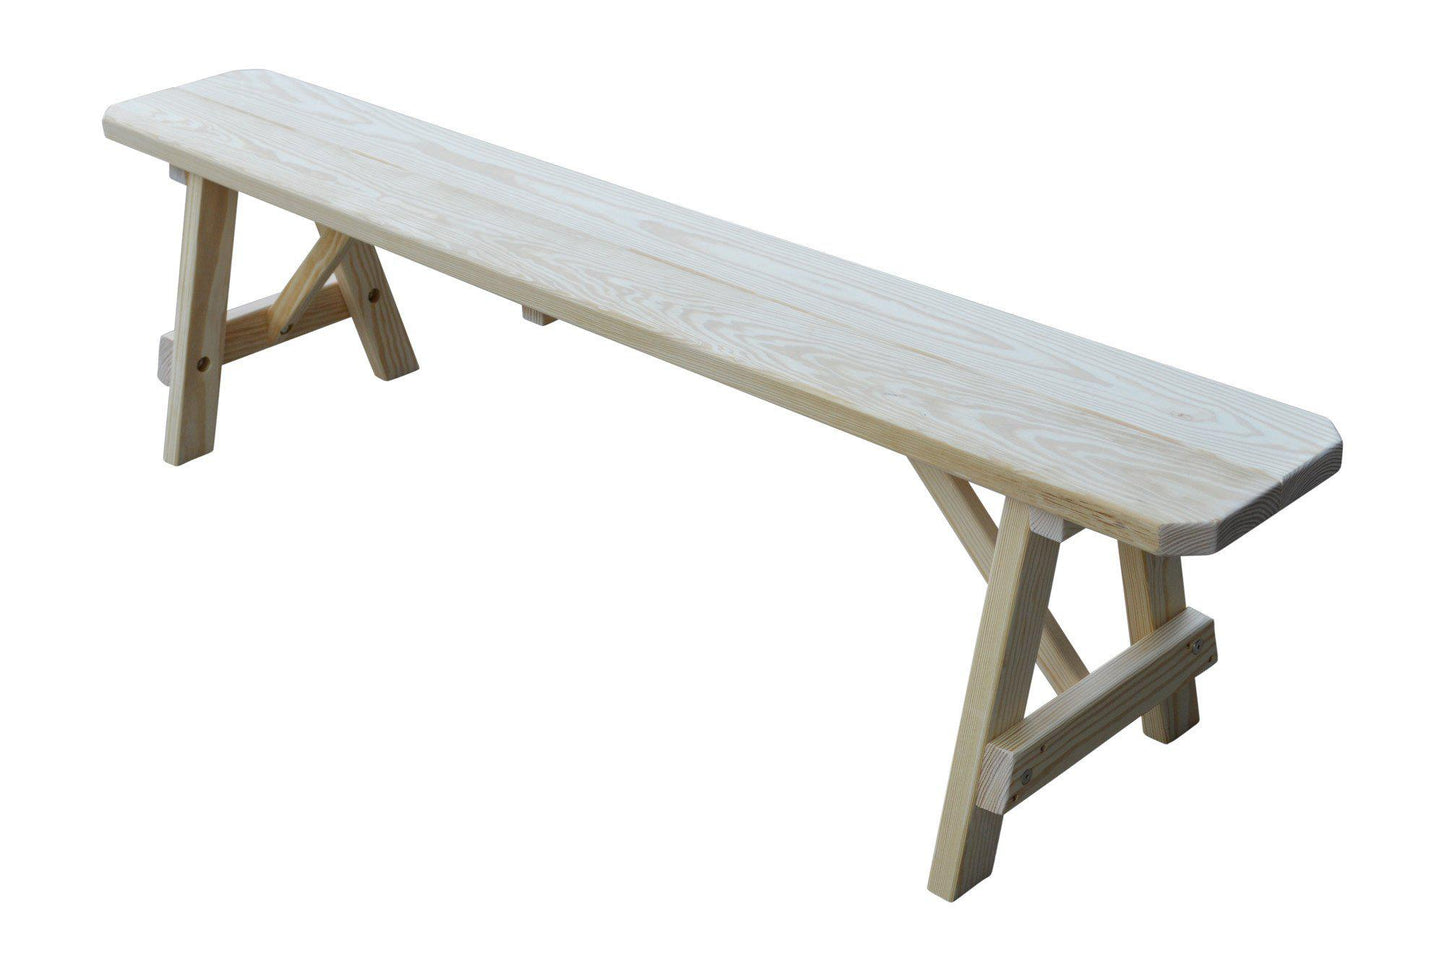 A&L Furniture Co. Yellow Pine 70" Traditional Bench Only - LEAD TIME TO SHIP 10 BUSINESS DAYS